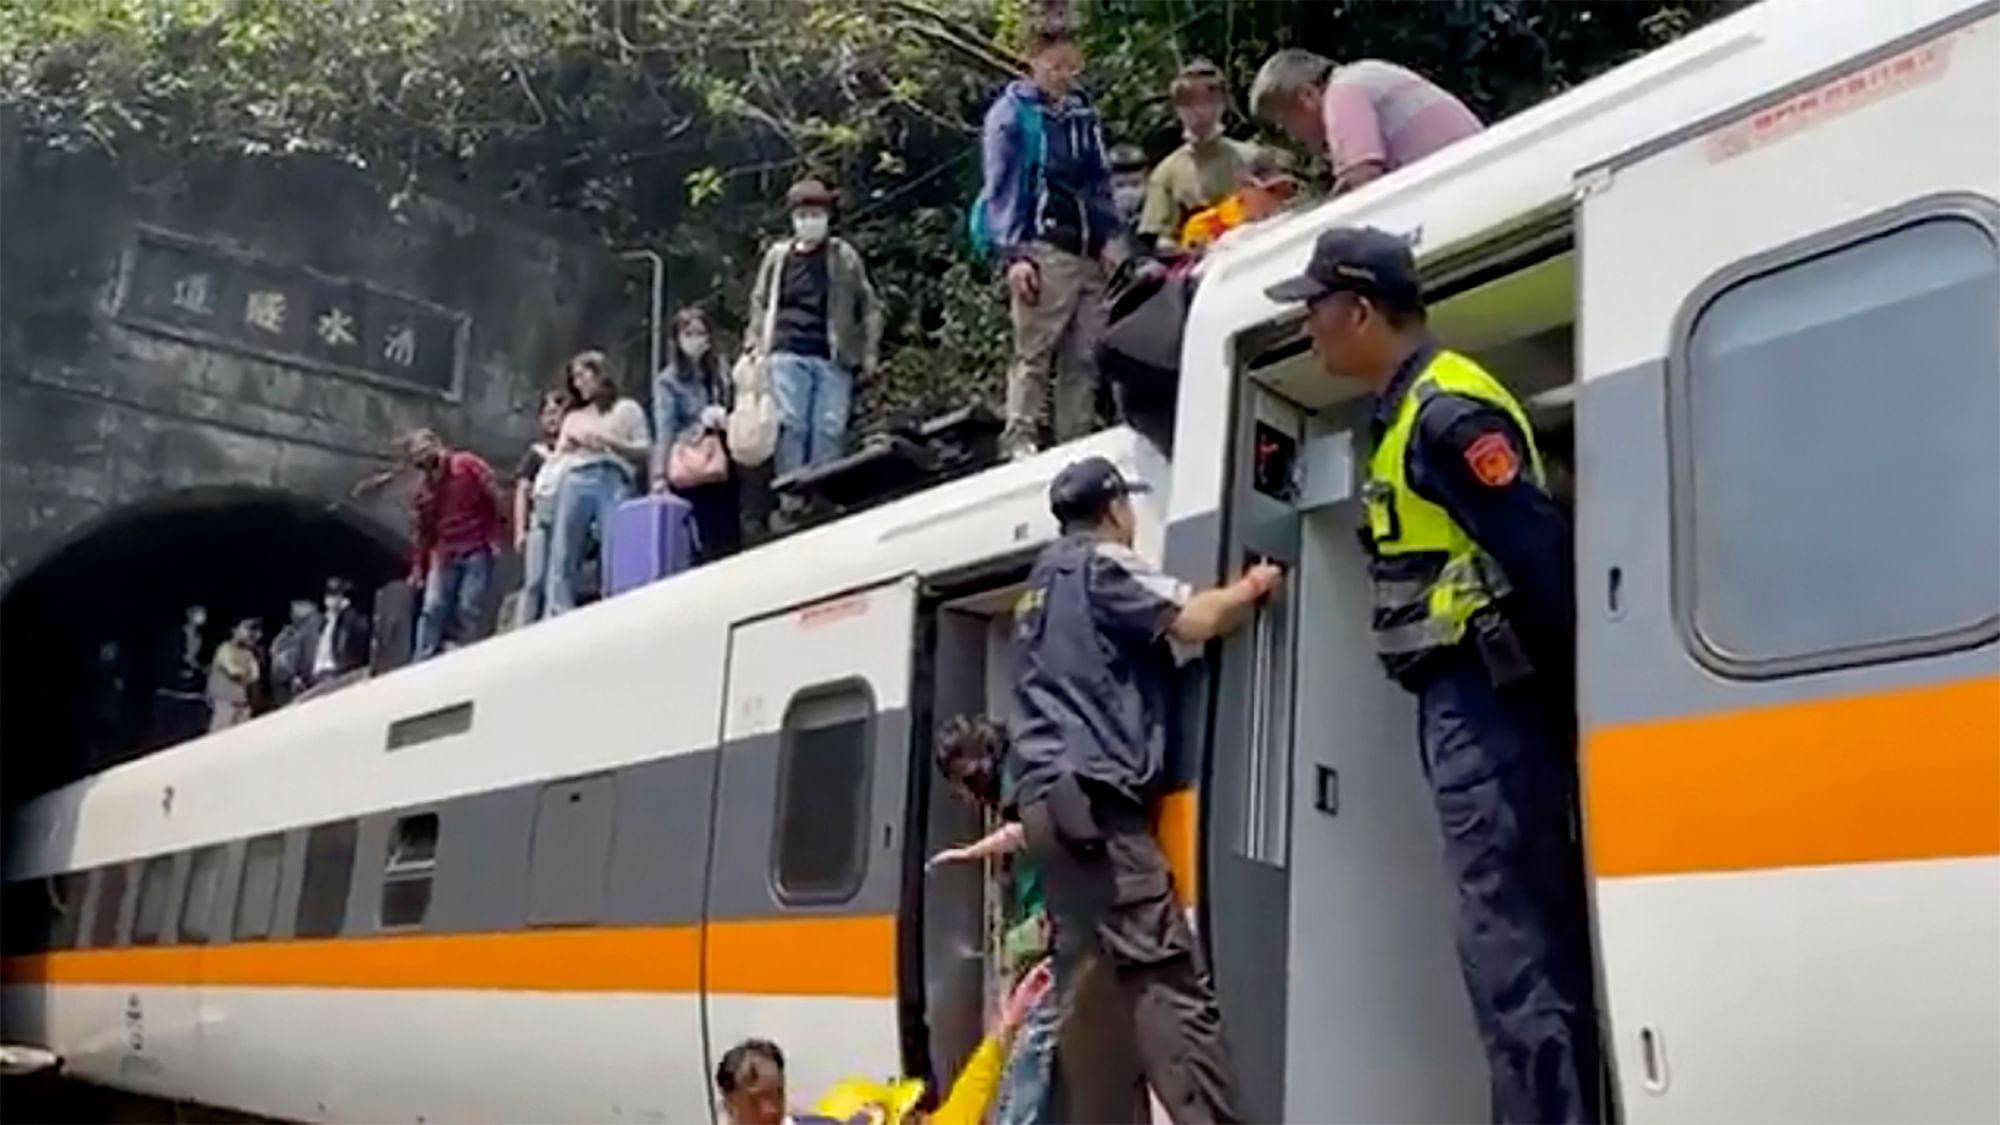 In this image made from a video released by hsnews.com.tw, passengers are being helped to climb out of the derailed train in Hualien County in eastern Taiwan on Friday, April 2, 2021. The train partially derailed along Taiwan’s east coast on Friday, injuring an unknown number of passengers and causing several fatalities. 